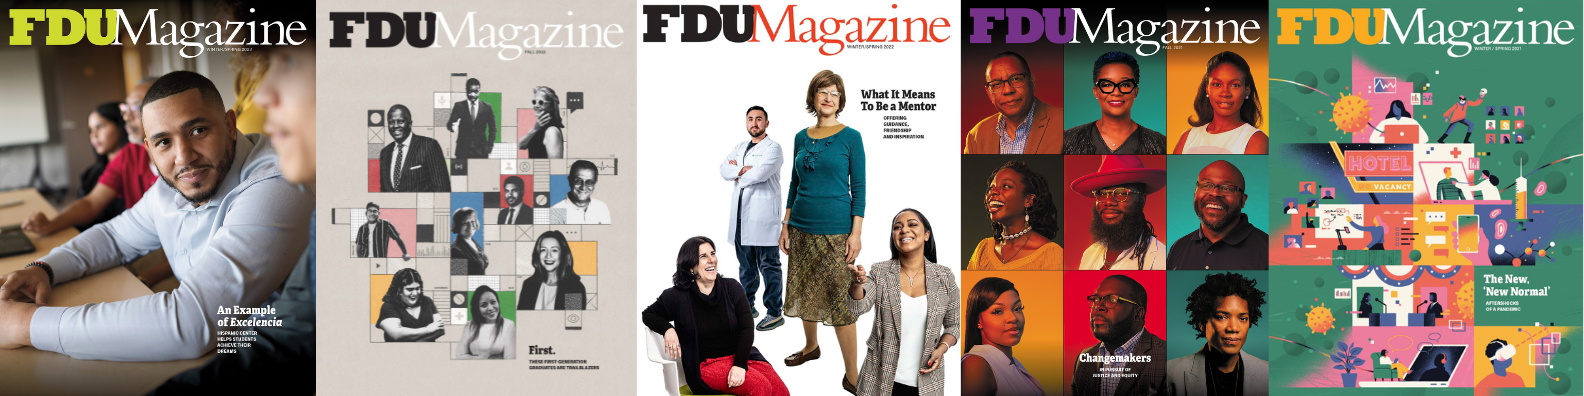 The five most recent covers of FDU Magazine.